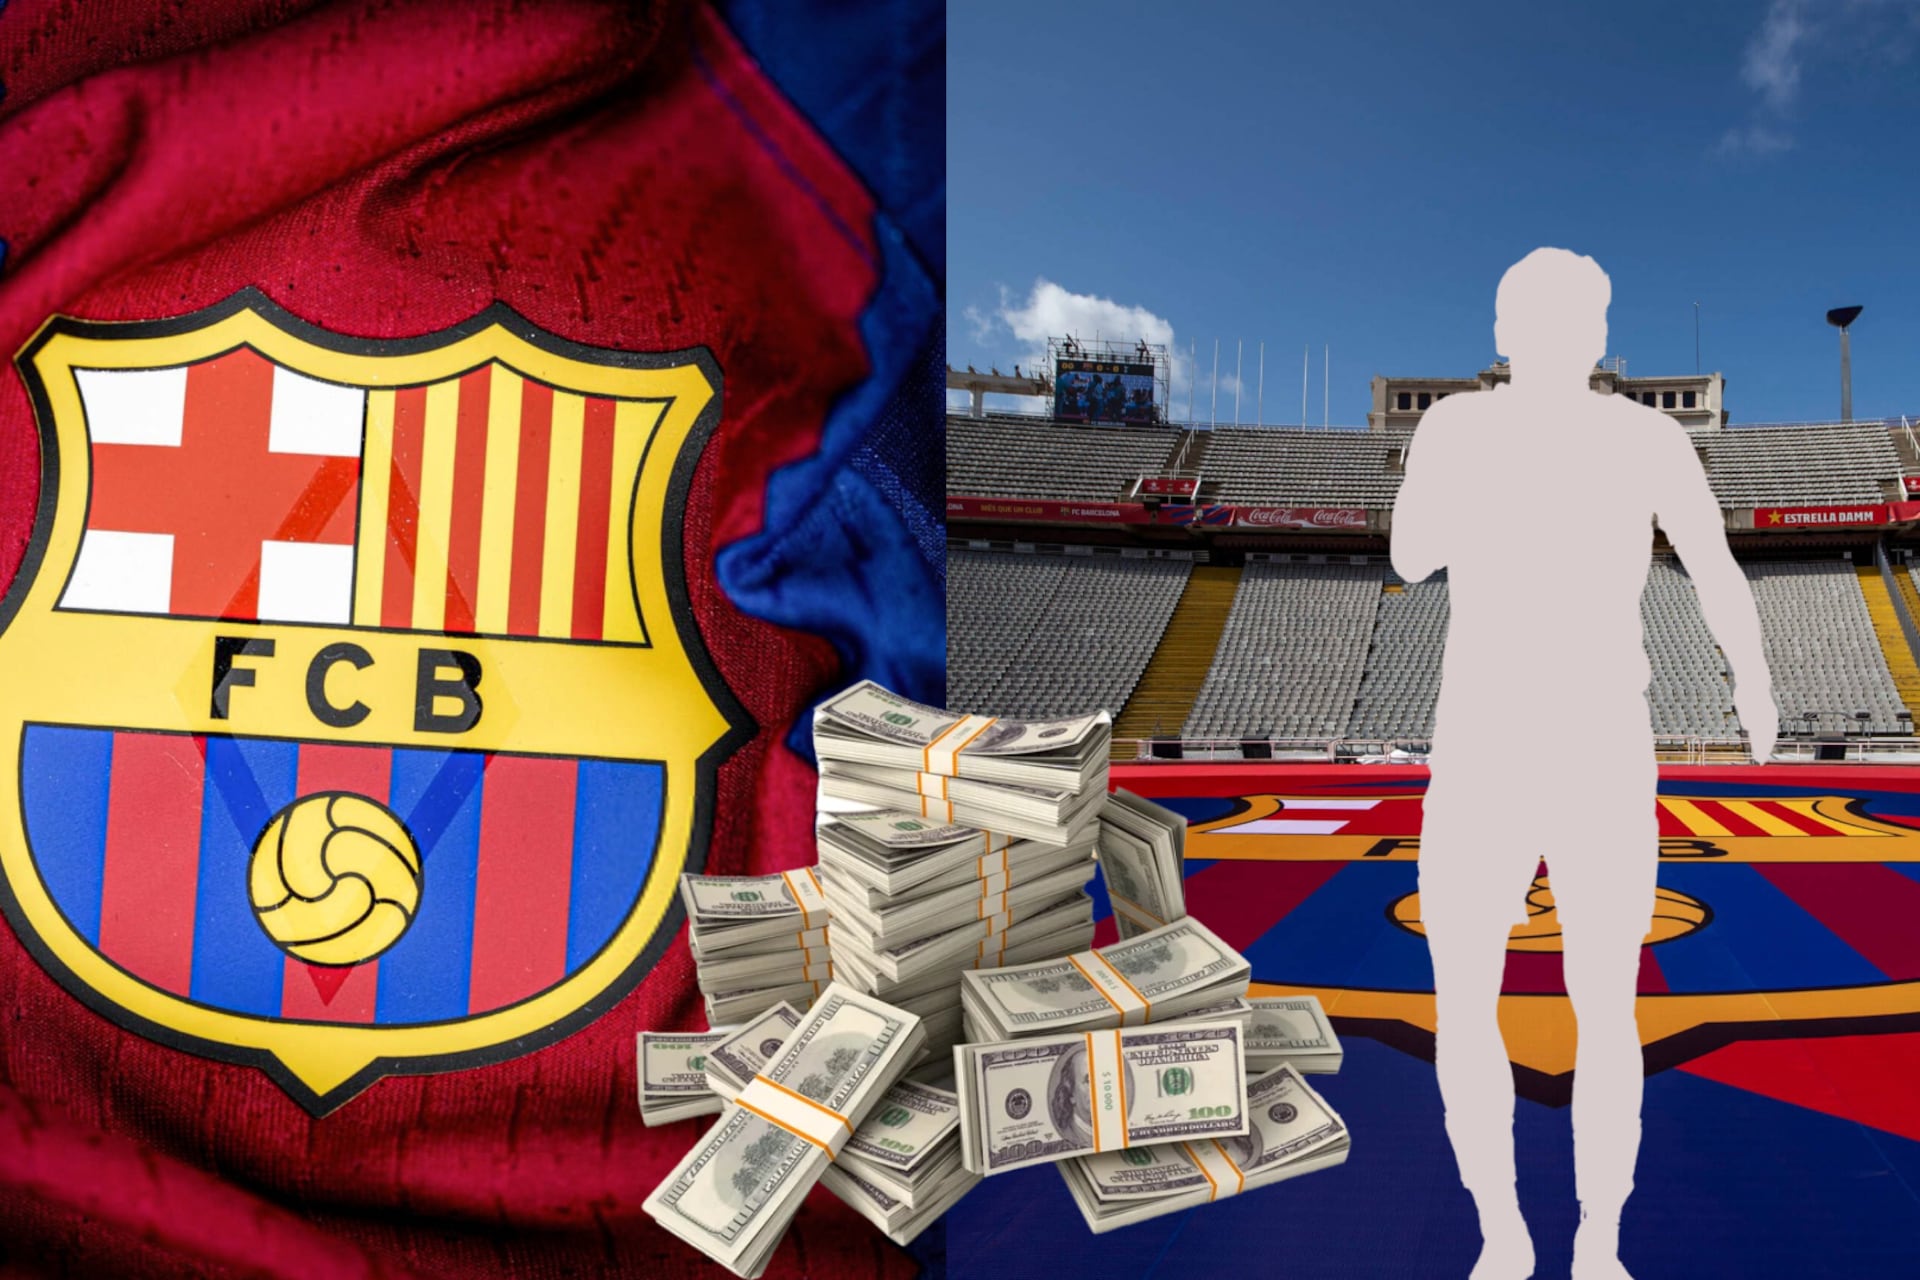 FC Barcelona turn the other way as this target is worth $164 million